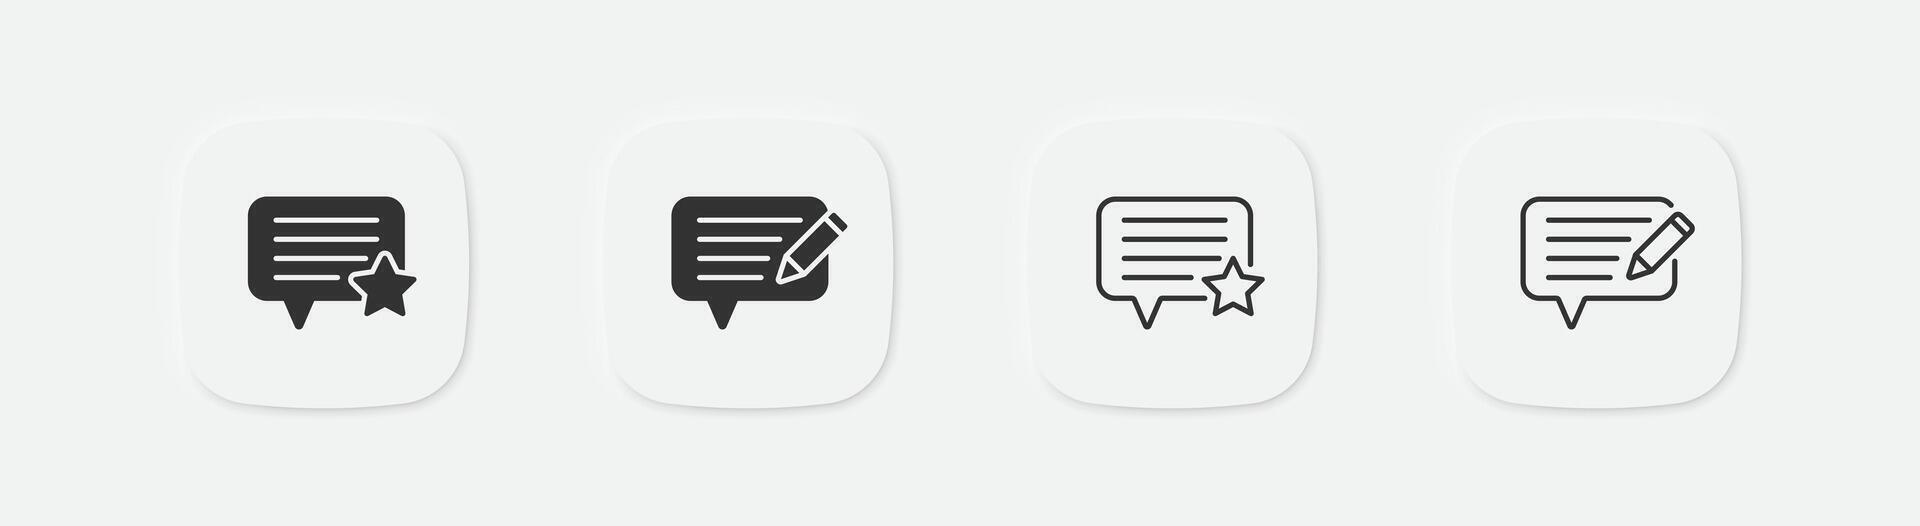 Feedback icon. Service comment symbol. Talk icons. Recommend to people sign. Star and pencil symbols. Vector isolated sign.